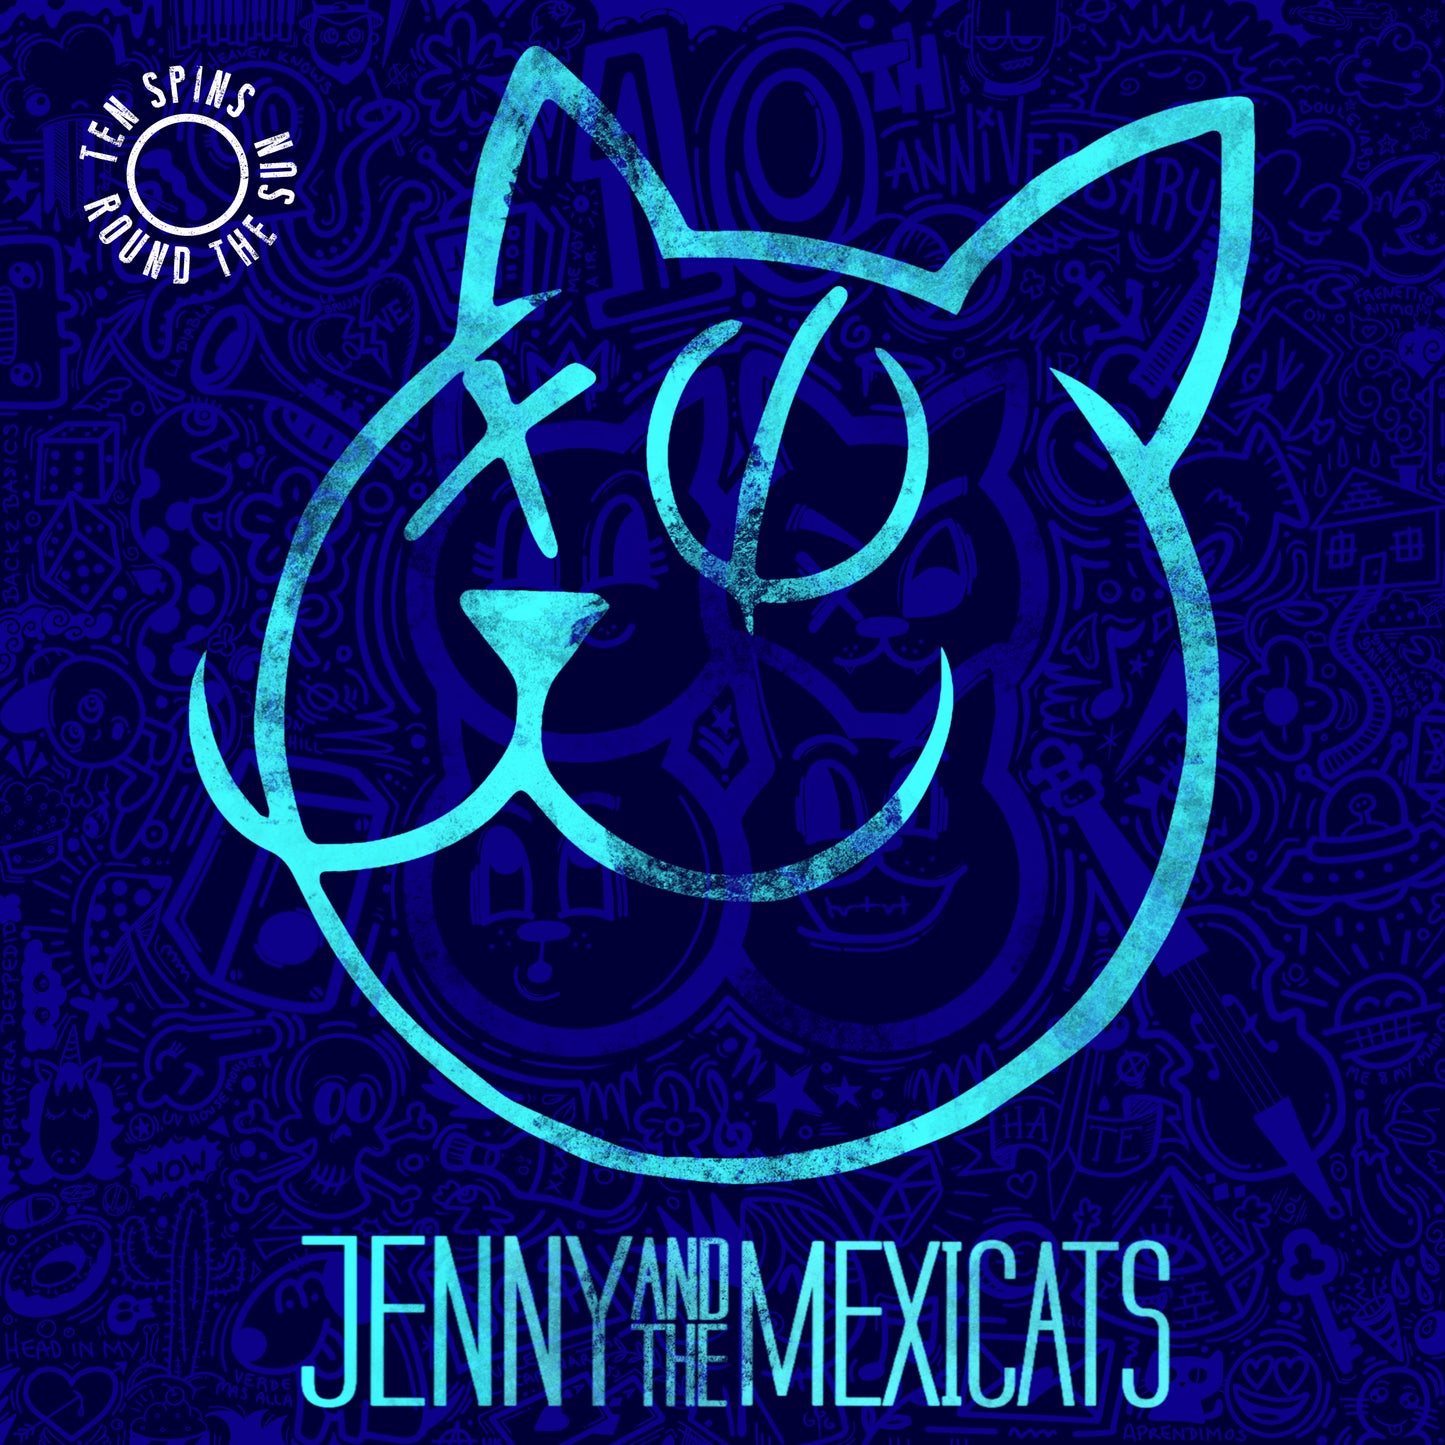 Jenny and The Mexicats - Ten Spins Round the Sun (10 Year Anniversary Album, CD)